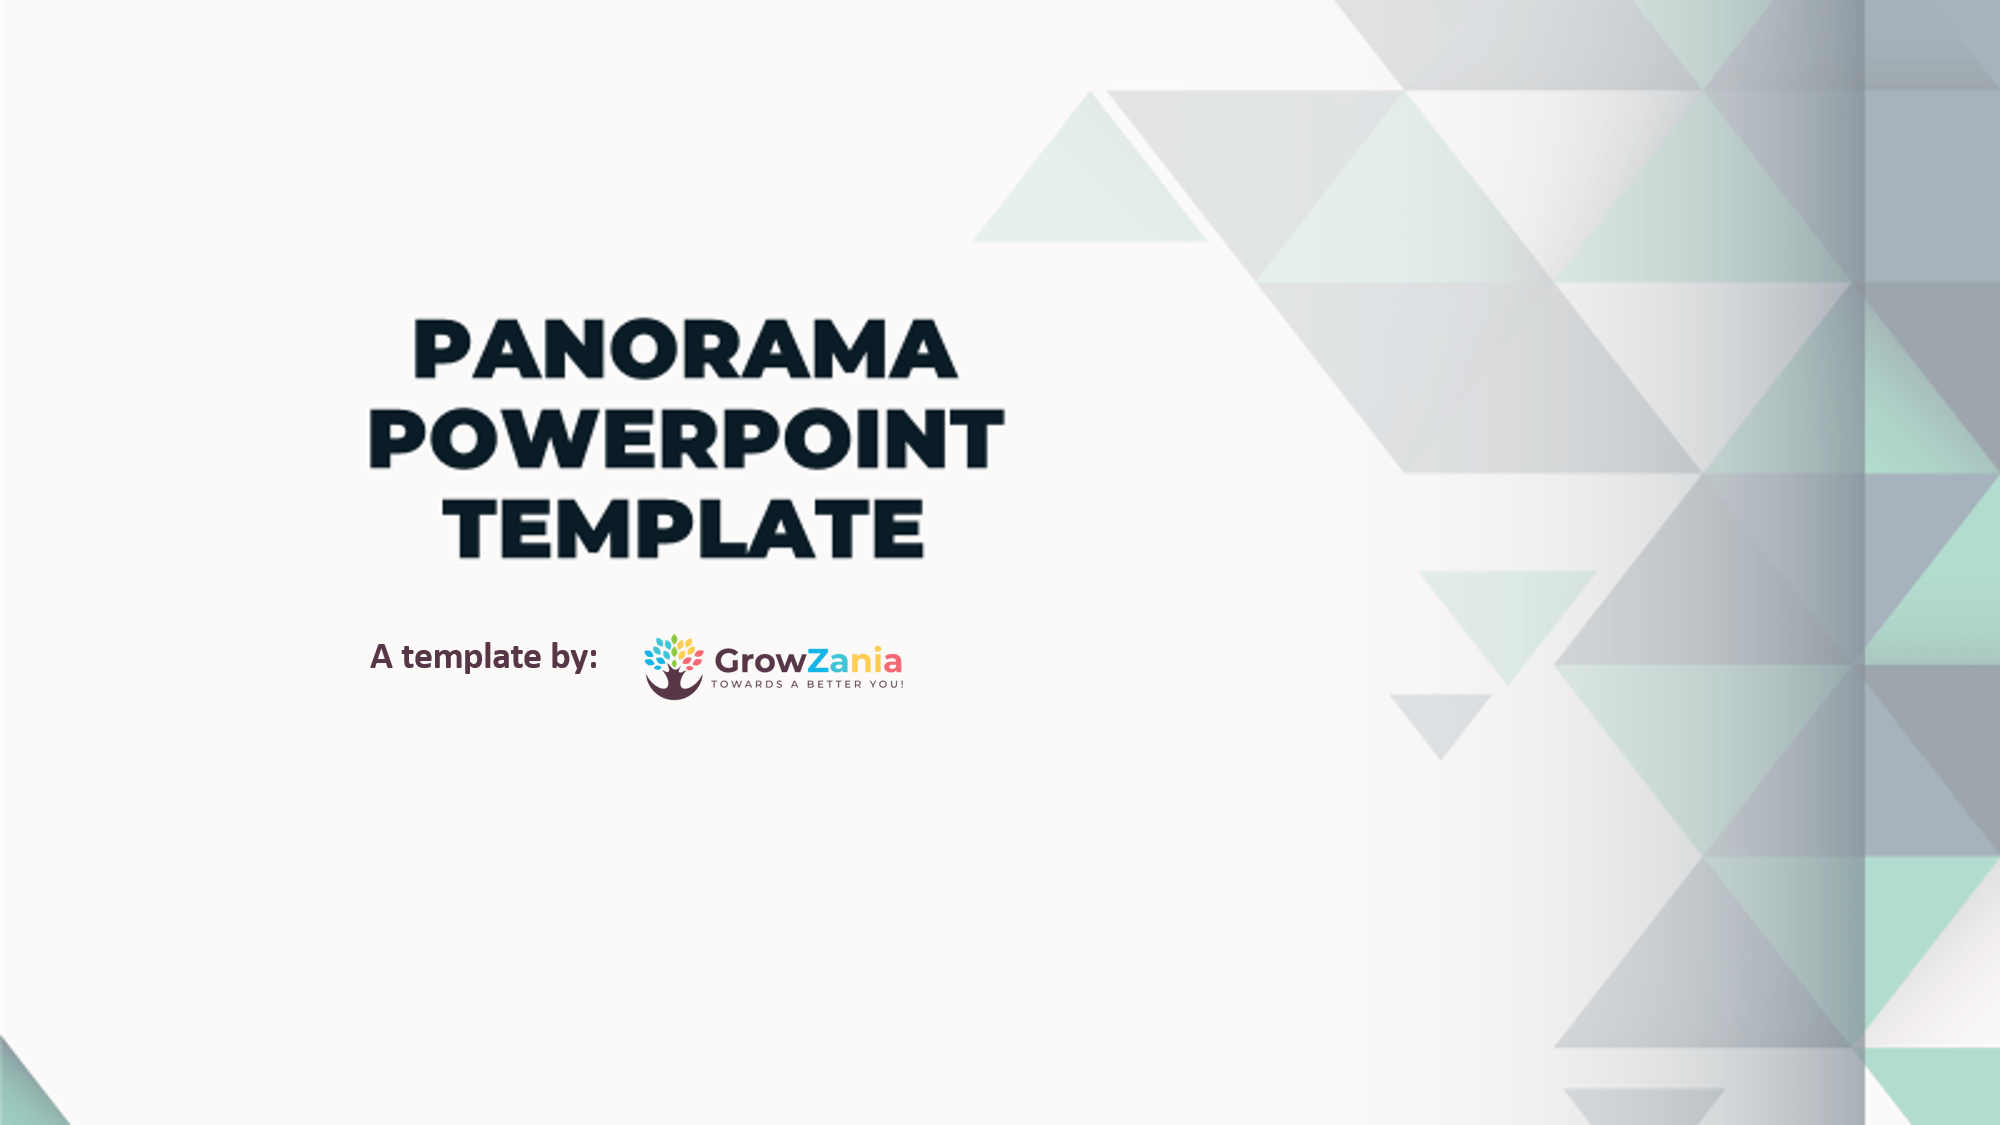 Panorama - Free Simple PowerPoint Template for your next presentation